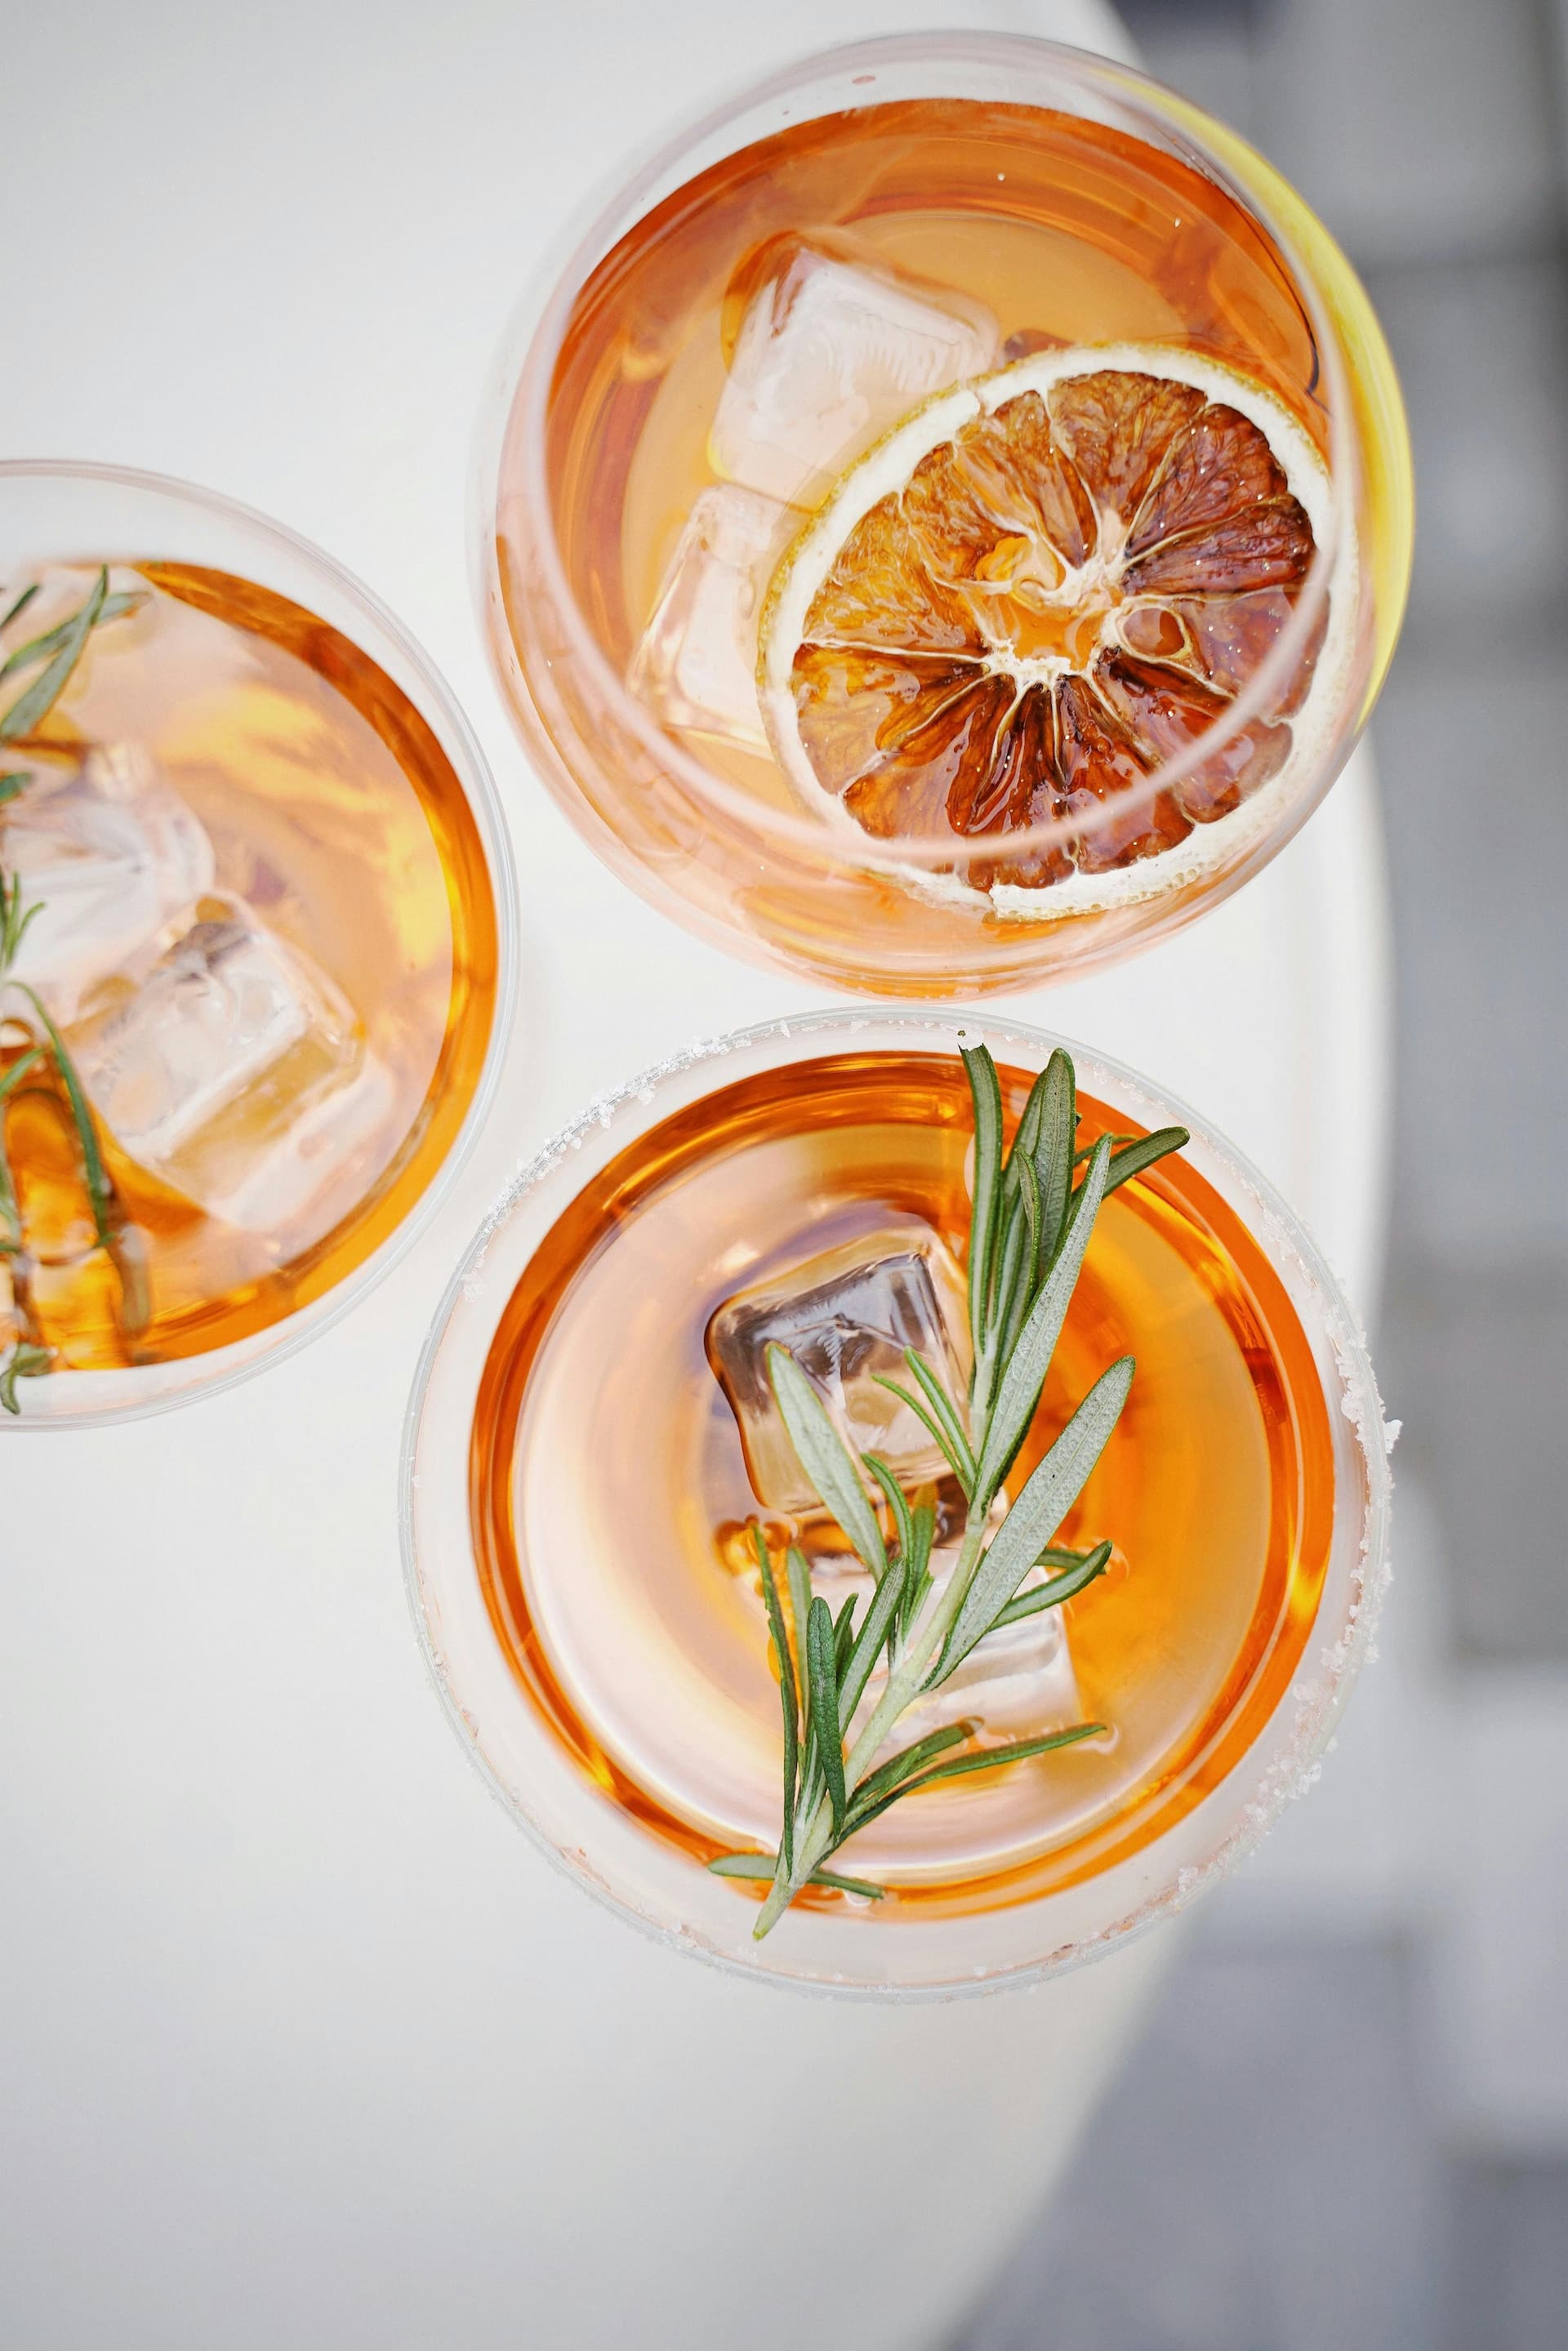 The Golden Ratio: How To Balance The Bitterness In Aperitifs And Amari